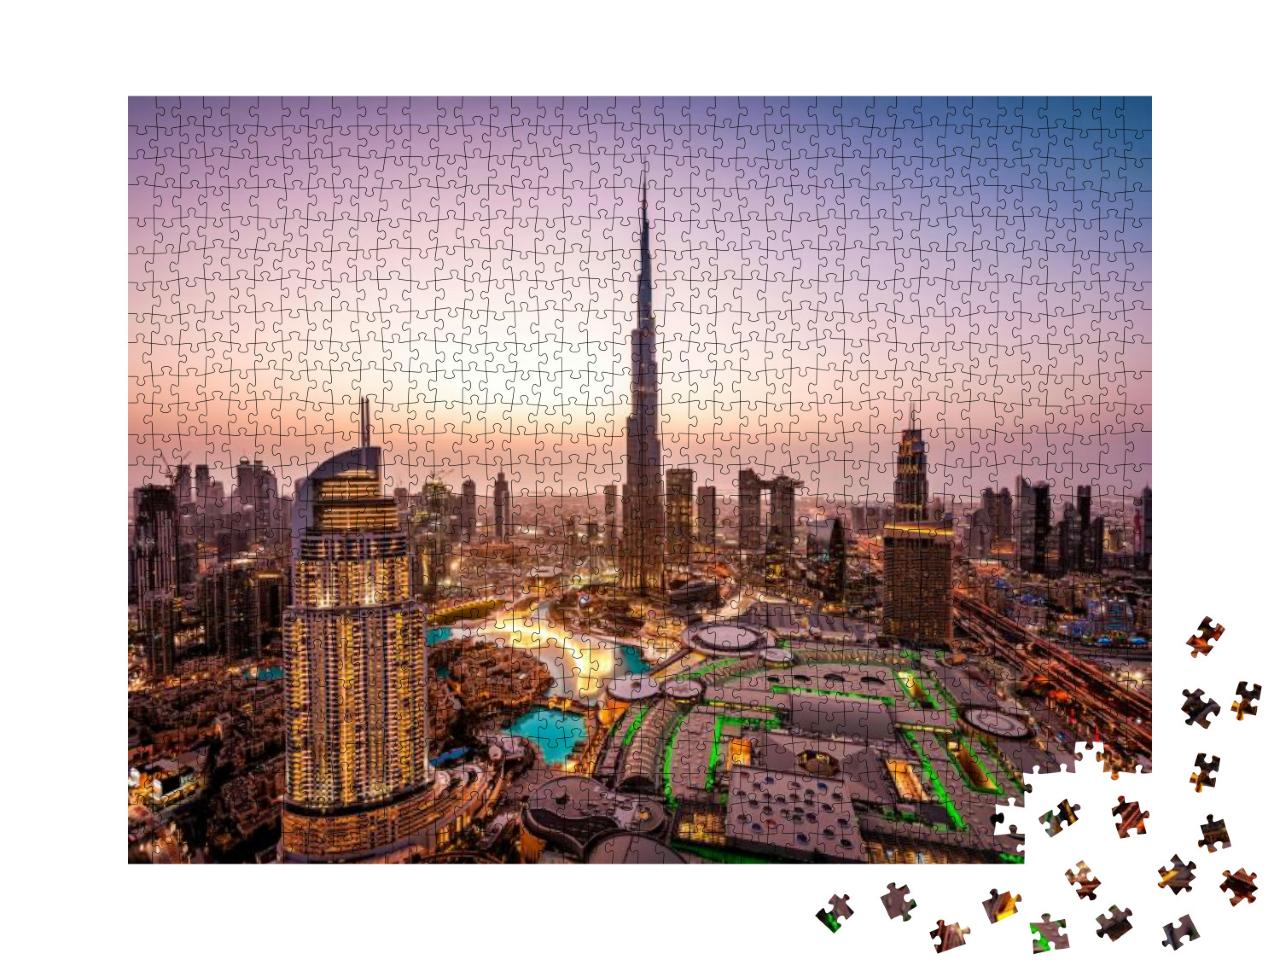 Wow View of Dubai Skyline At Night. City Lights Popping... Jigsaw Puzzle with 1000 pieces